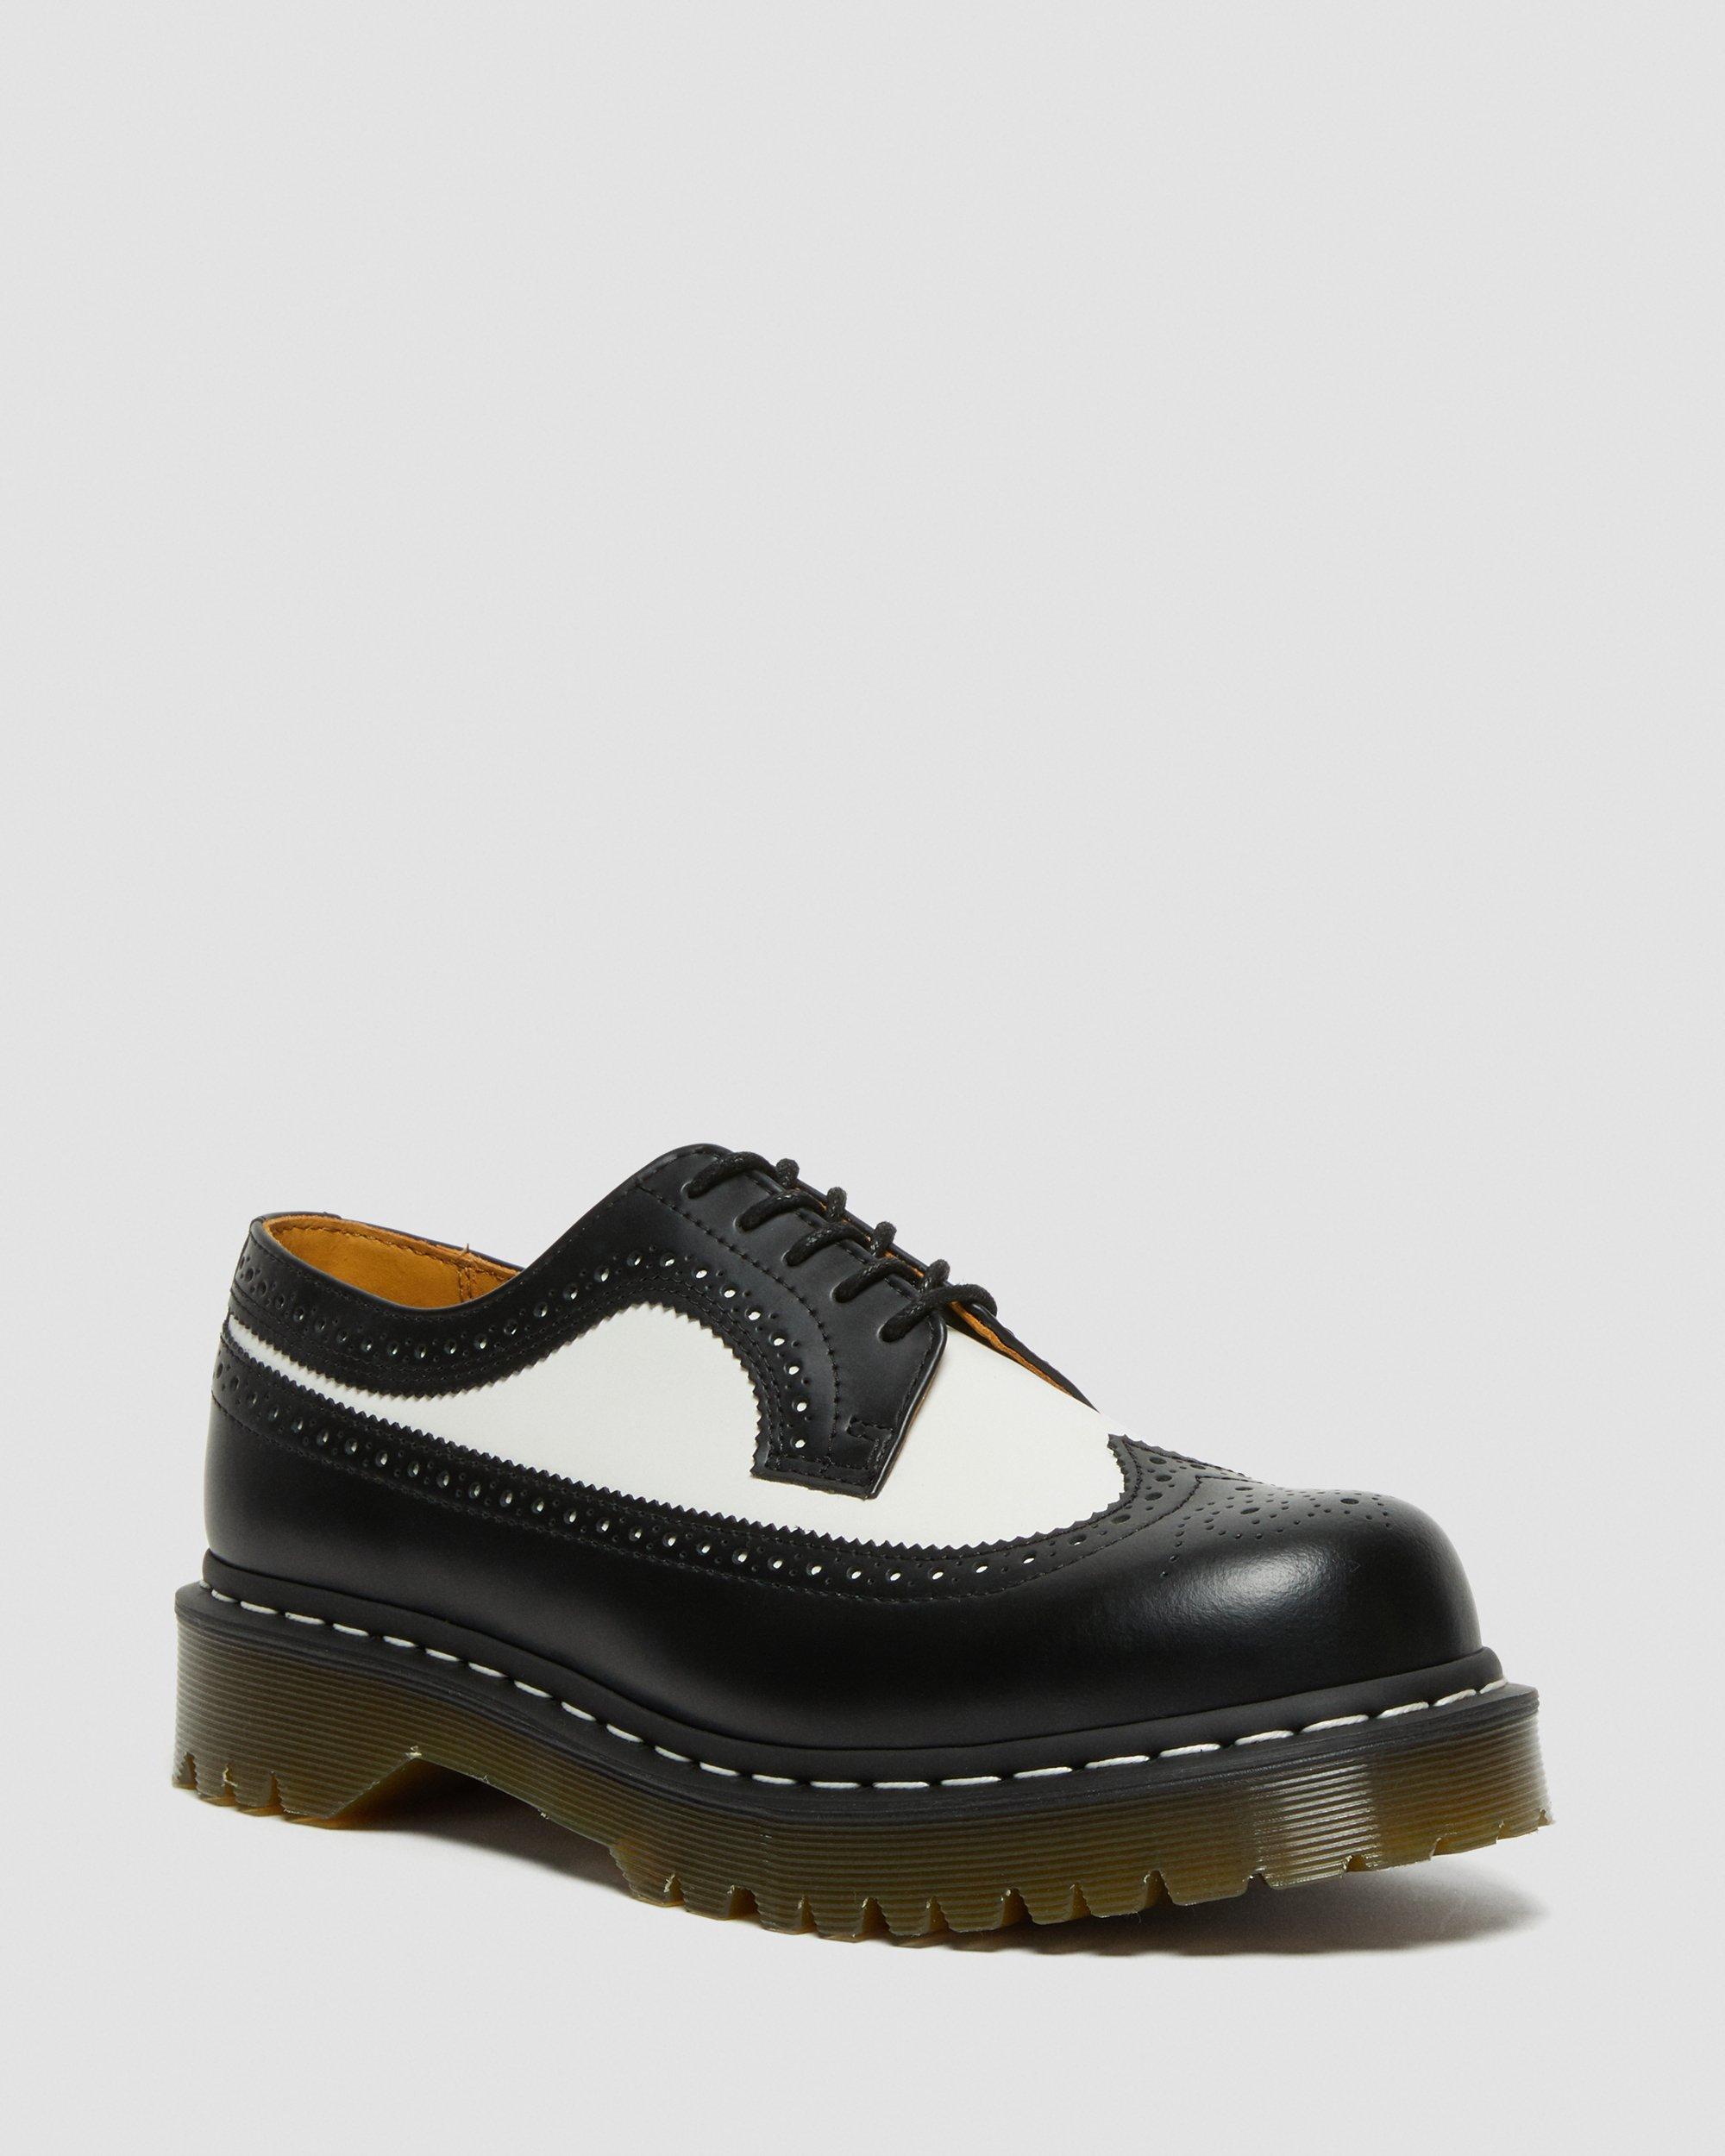 DR MARTENS 3989 Bex Smooth Leather Brogue Shoes